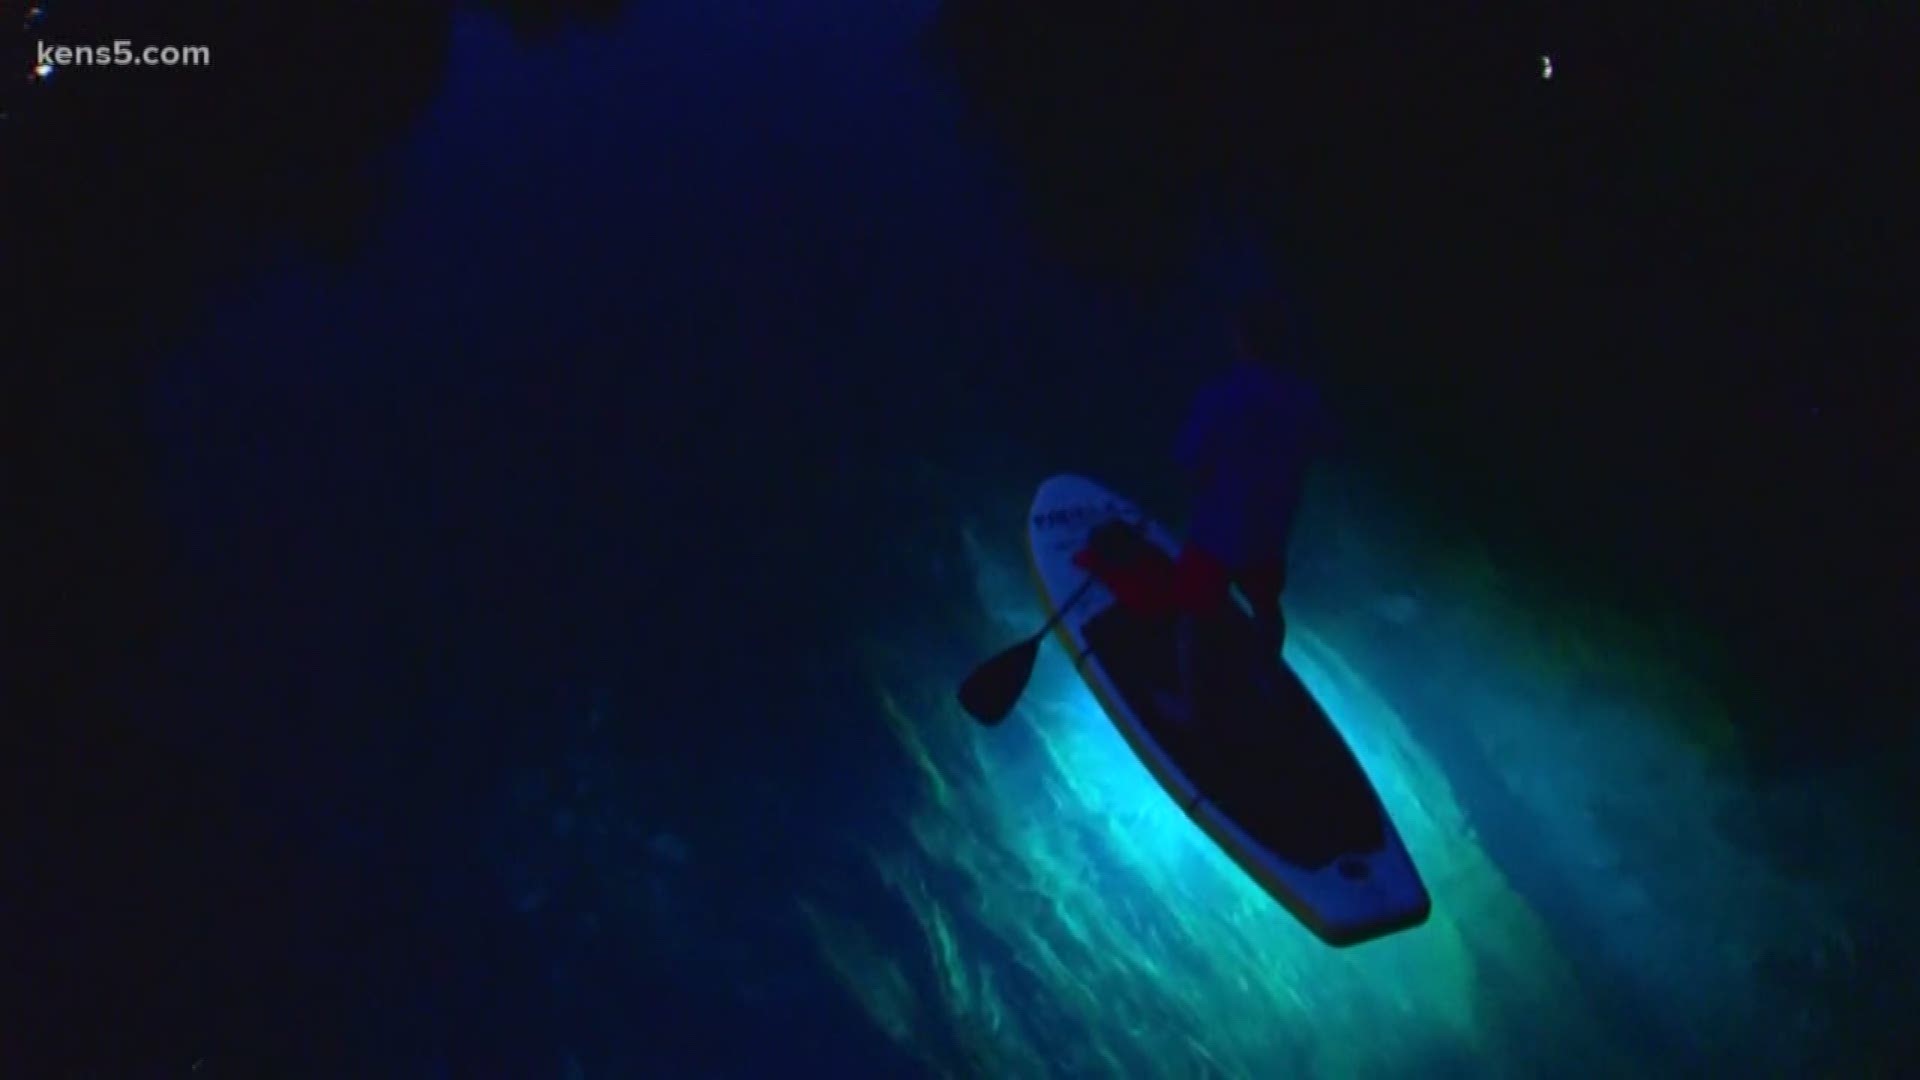 KENS 5's Barry Davis checks out glow paddle boarding in San Marcos in this week's Texas Outdoors.